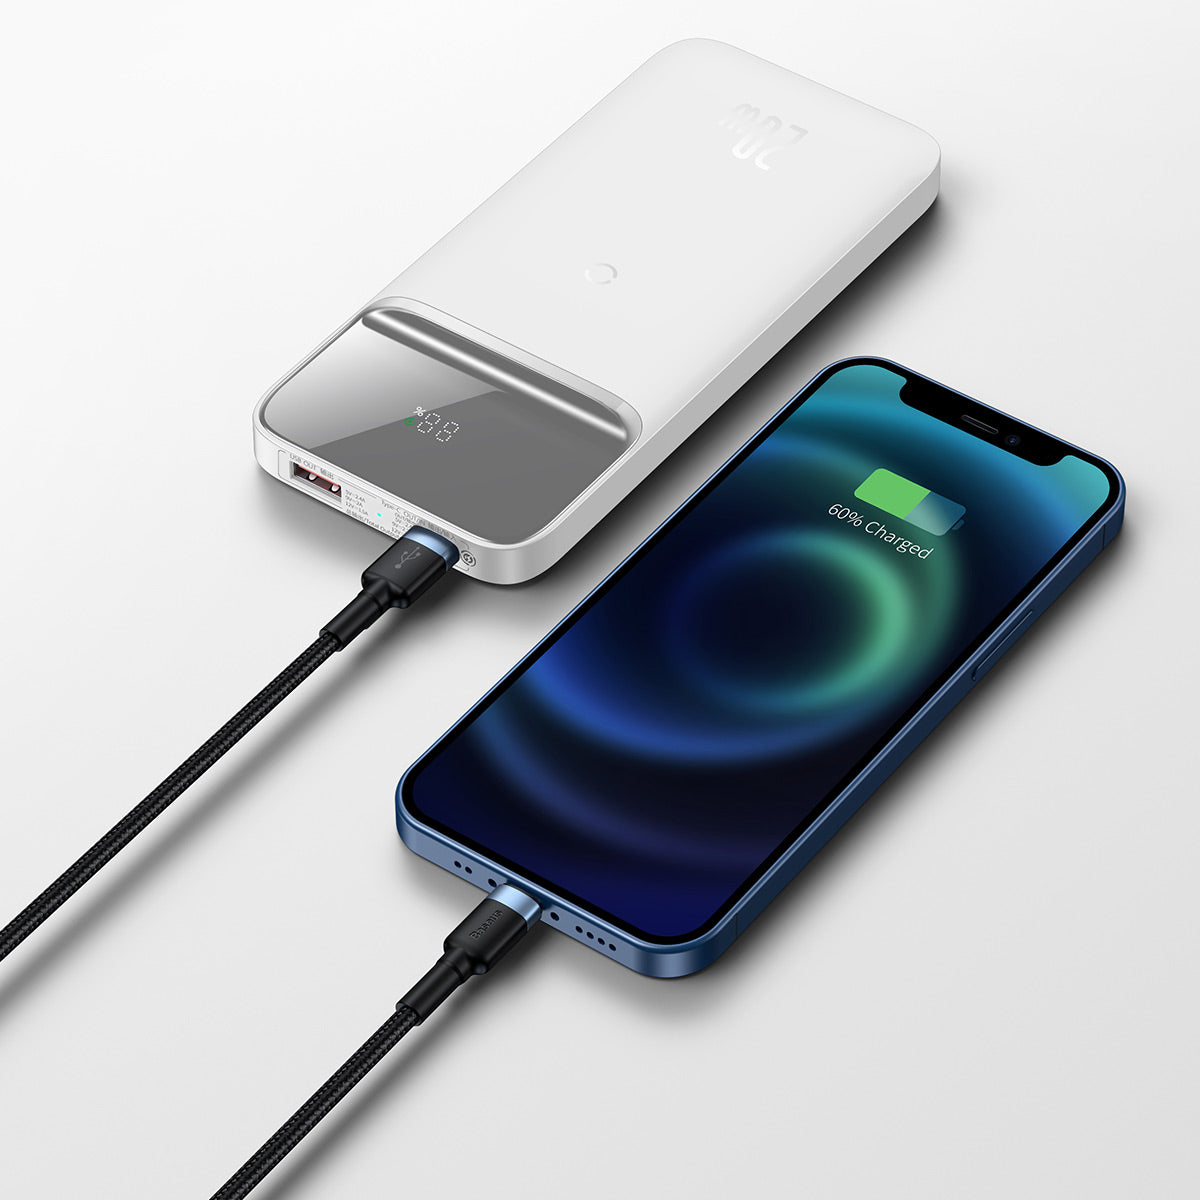 New UGREEN MagSafe Power Bank 10000mAh arrives in US -   News